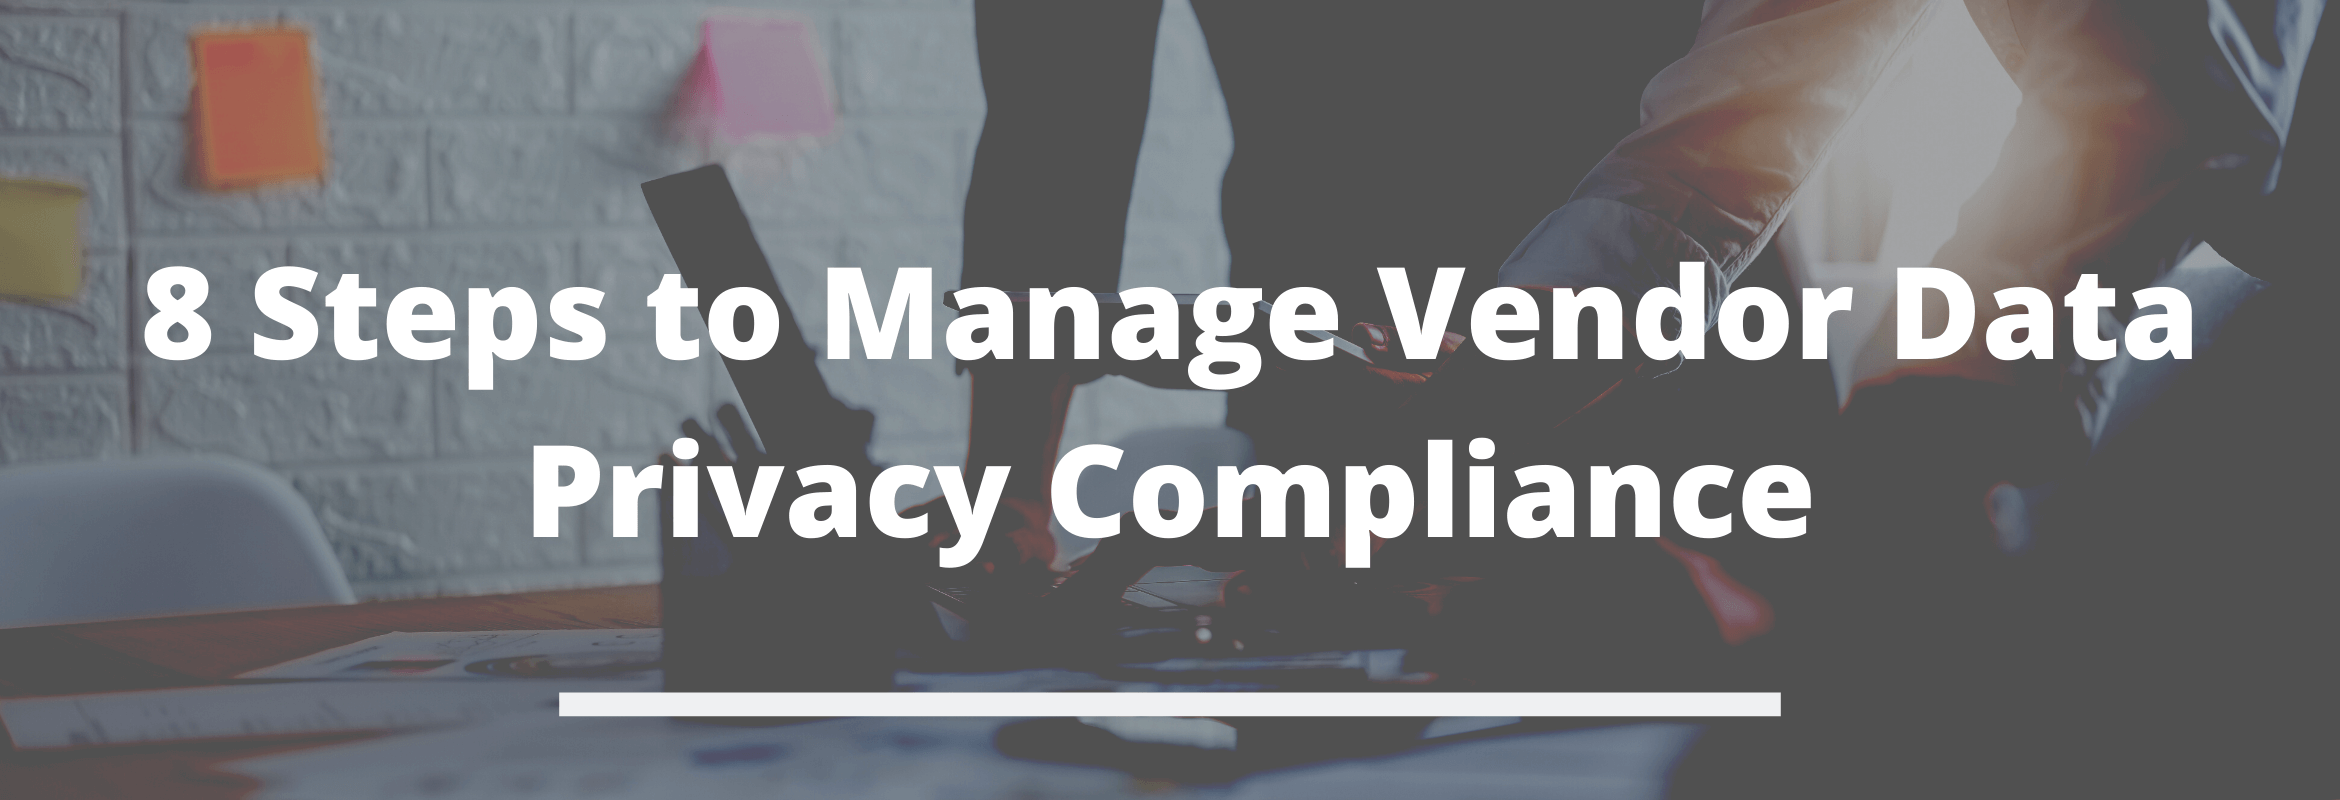 Eight vital steps organizations can take to ensure that vendors aren’t jeopardizing data privacy compliance.